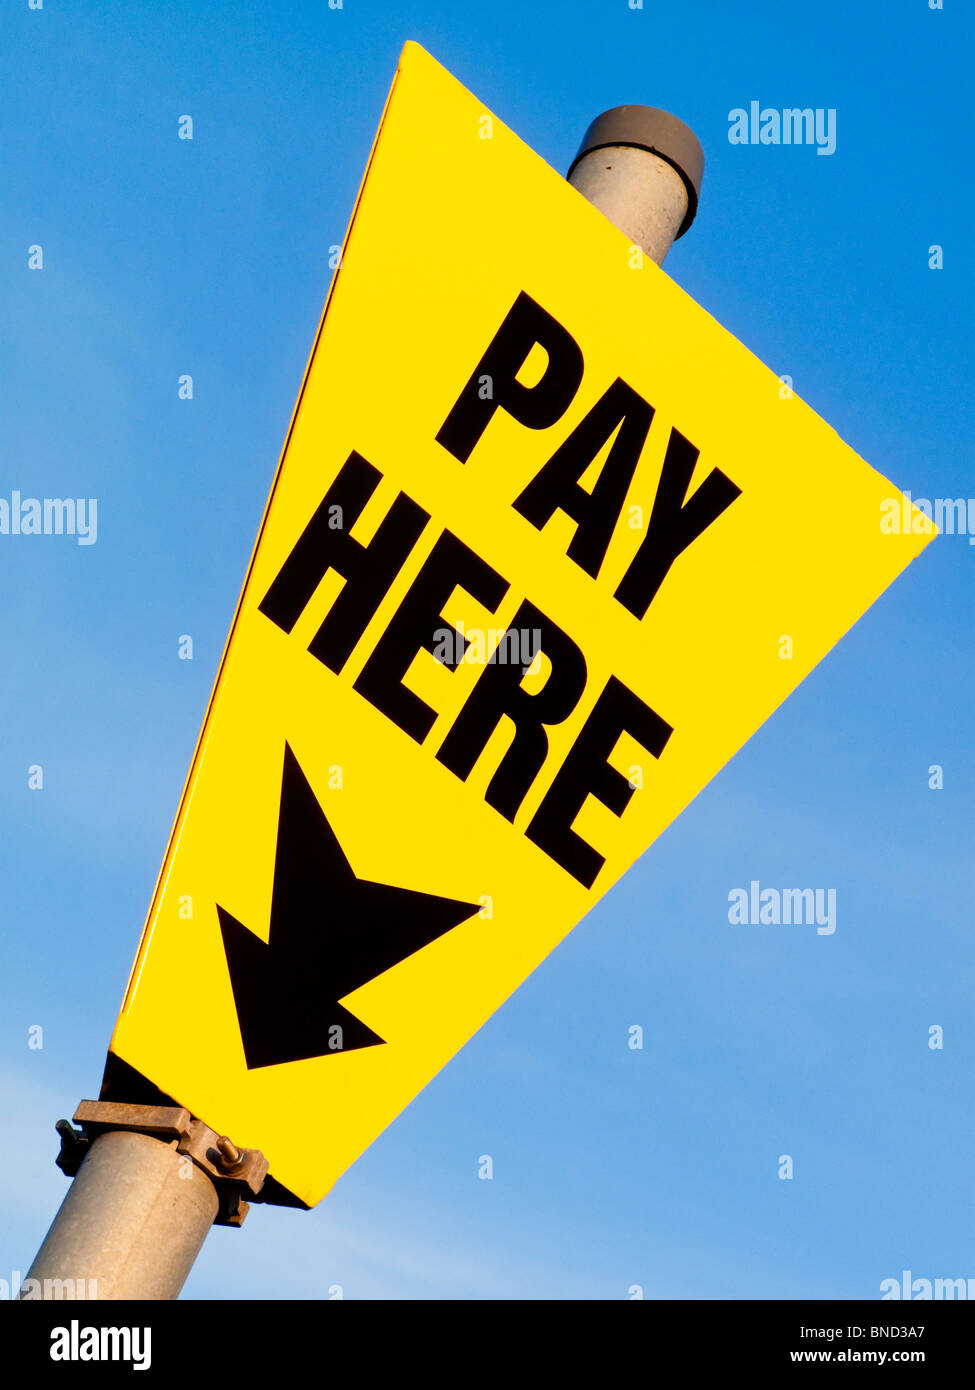 Yelow Pay Here sign in car park with blue sky behind and black text with arrow pointing down Stock Photo